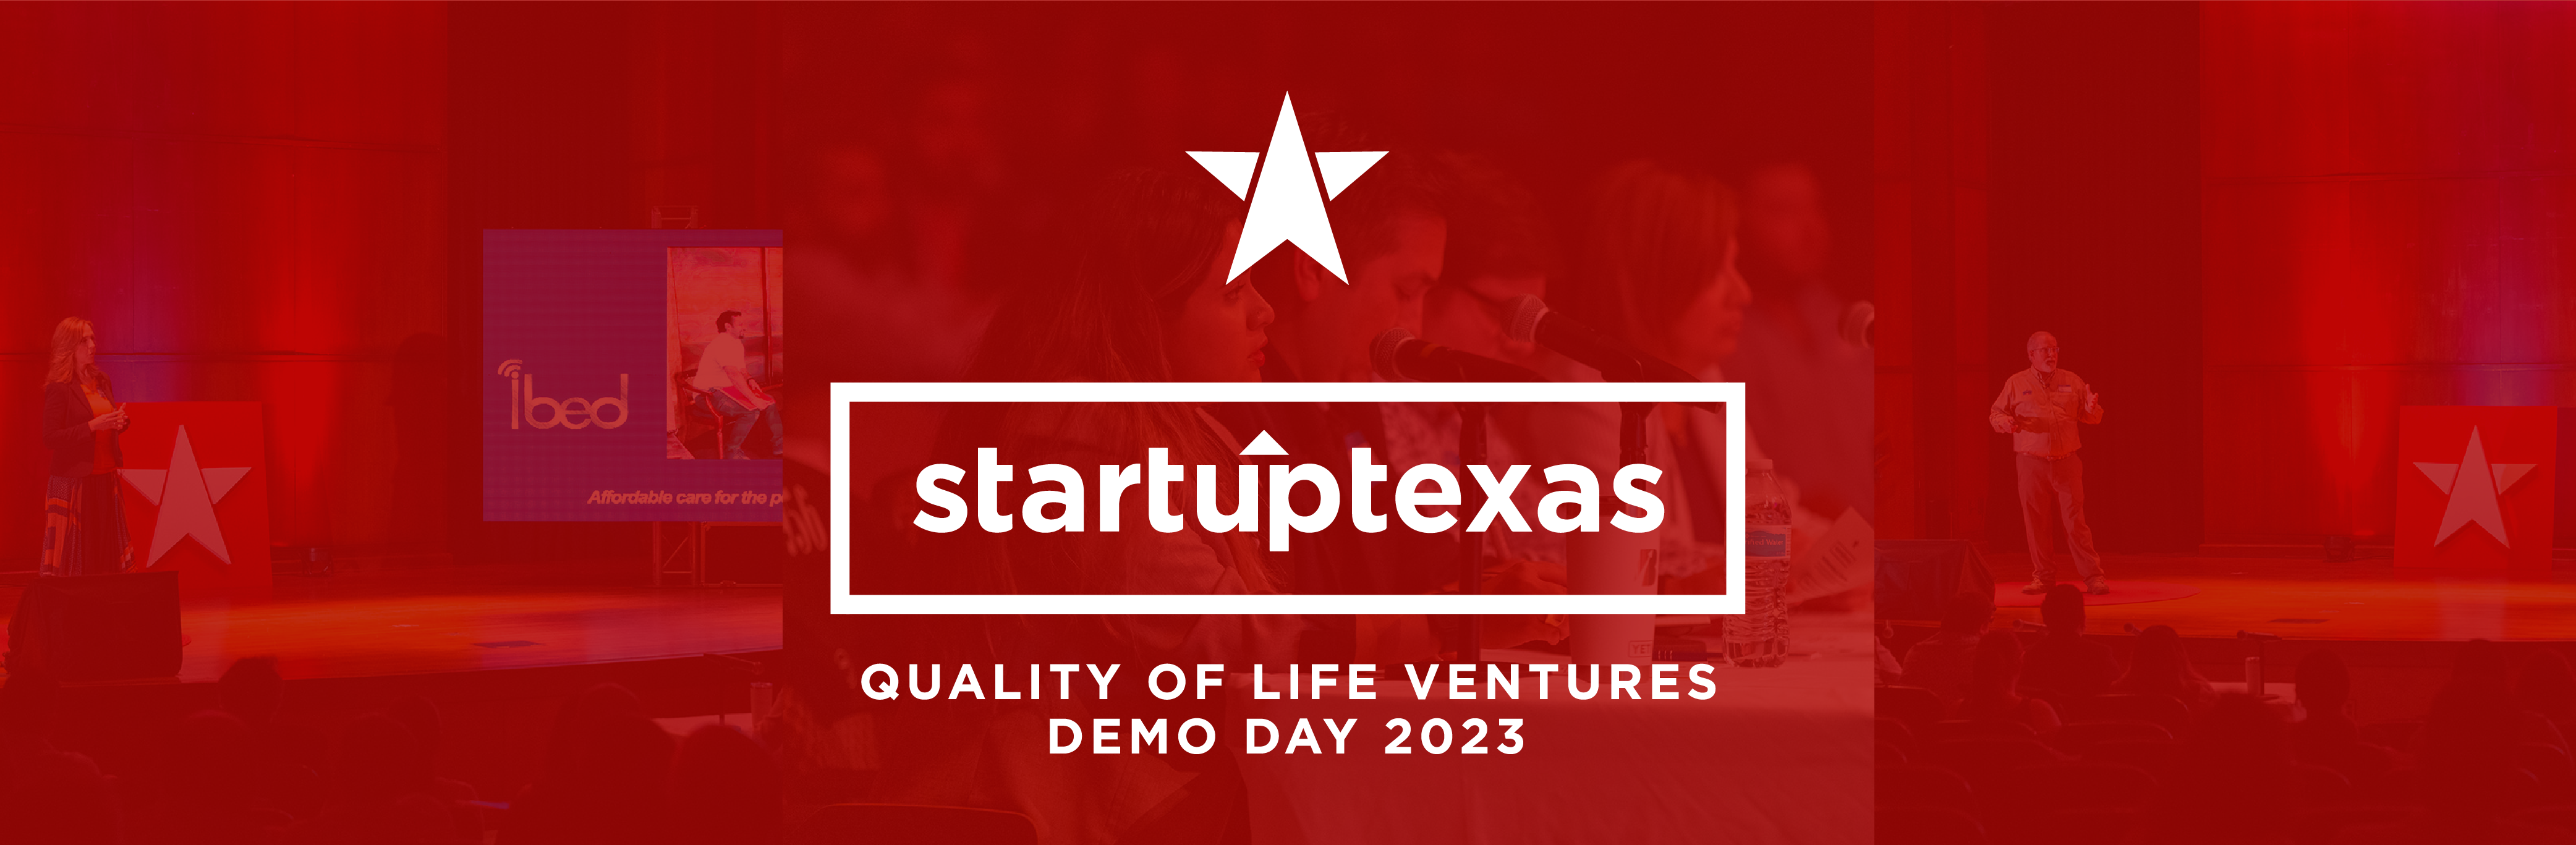 StartUp Texas Announces Demo Day 2023 with Seed Funding up to $40,000